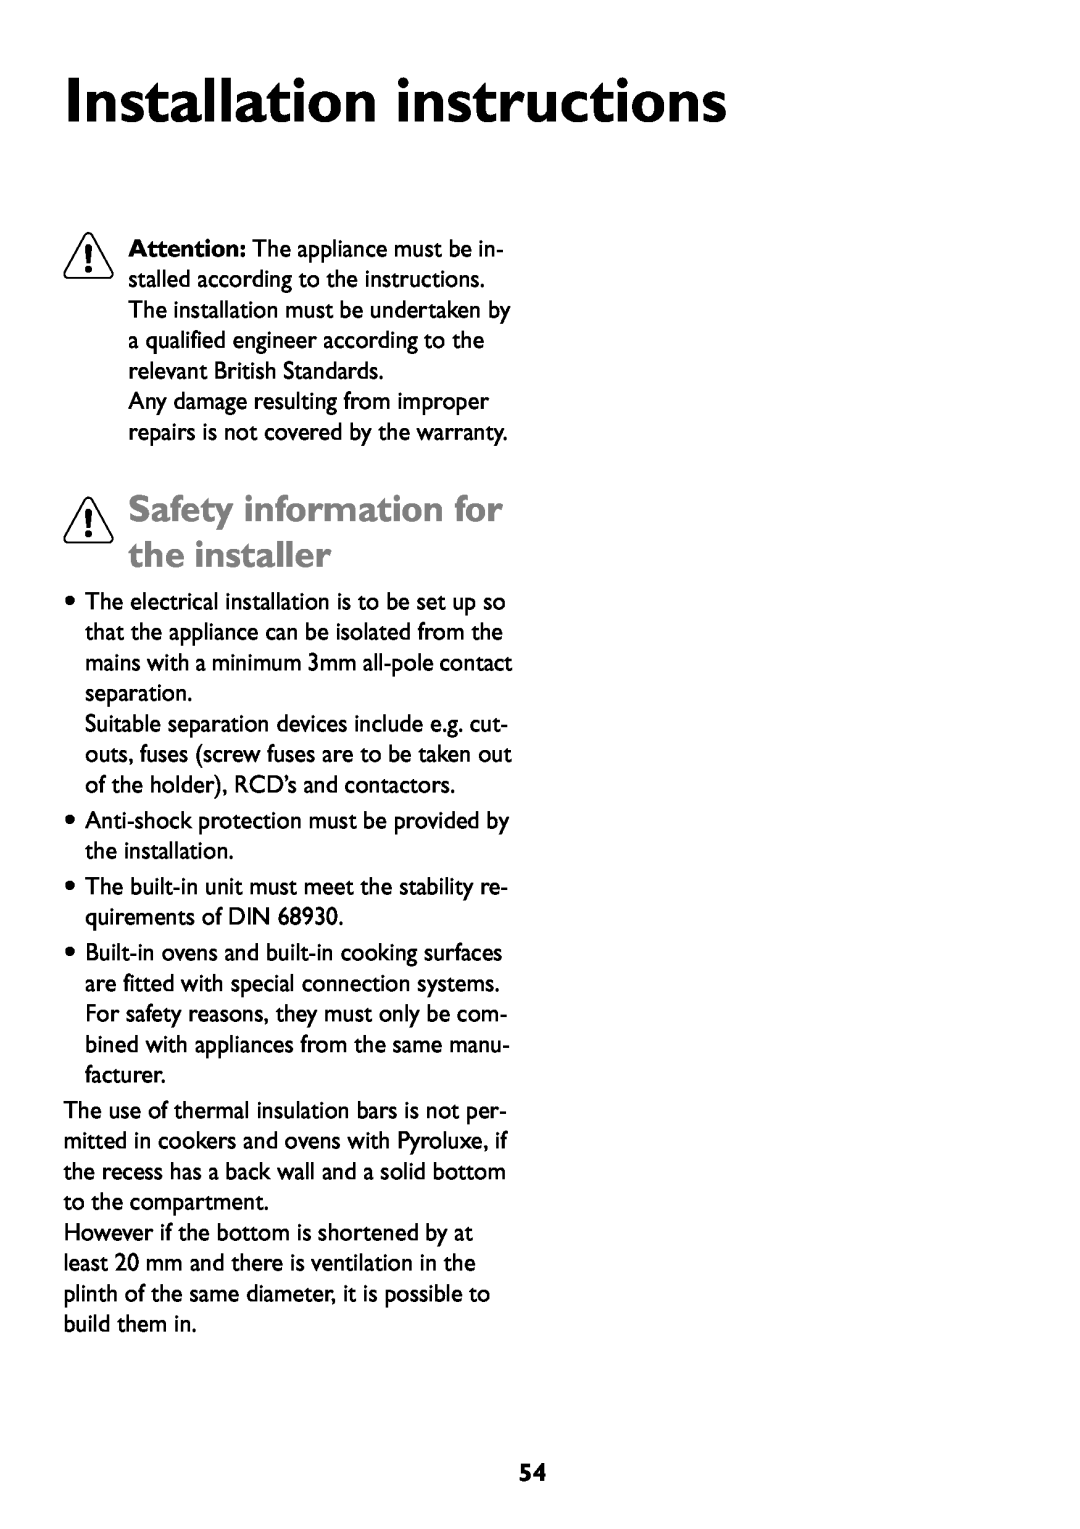 John Lewis JLBIOS609 manual 1Safety information for the installer, Installation instructions 